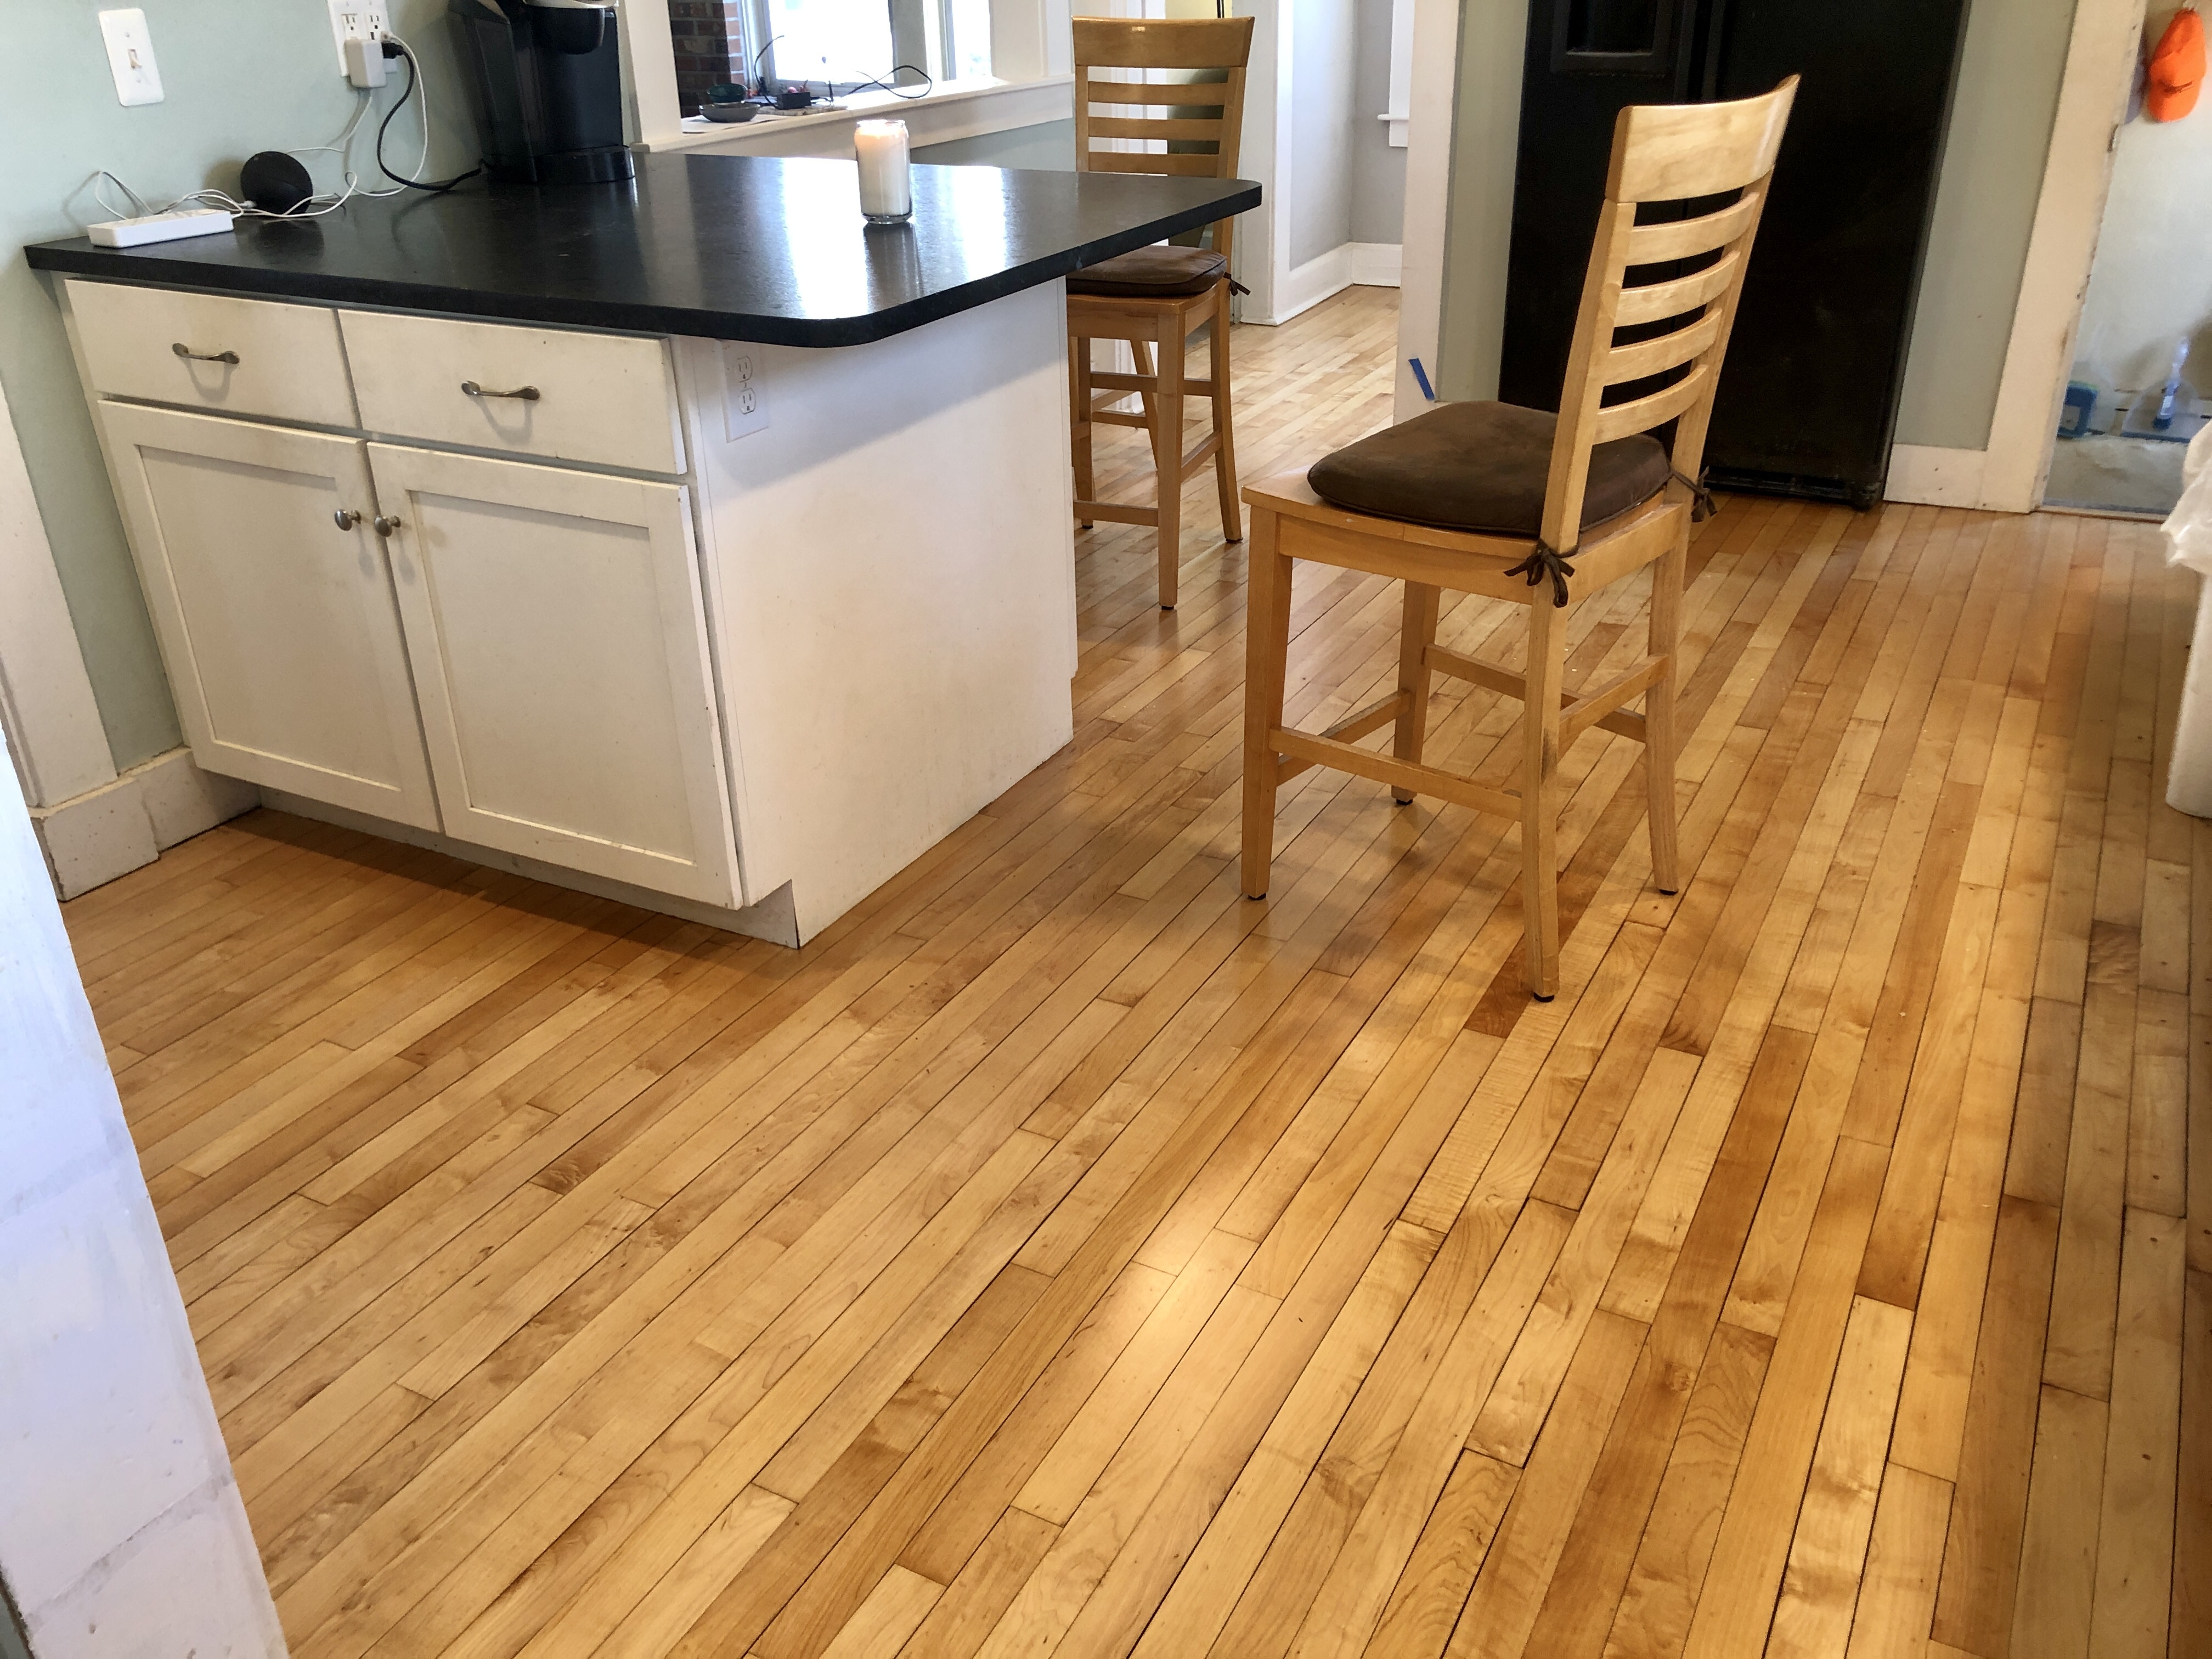 My newly refinished kitchen floor, part of my renovation of 2021.